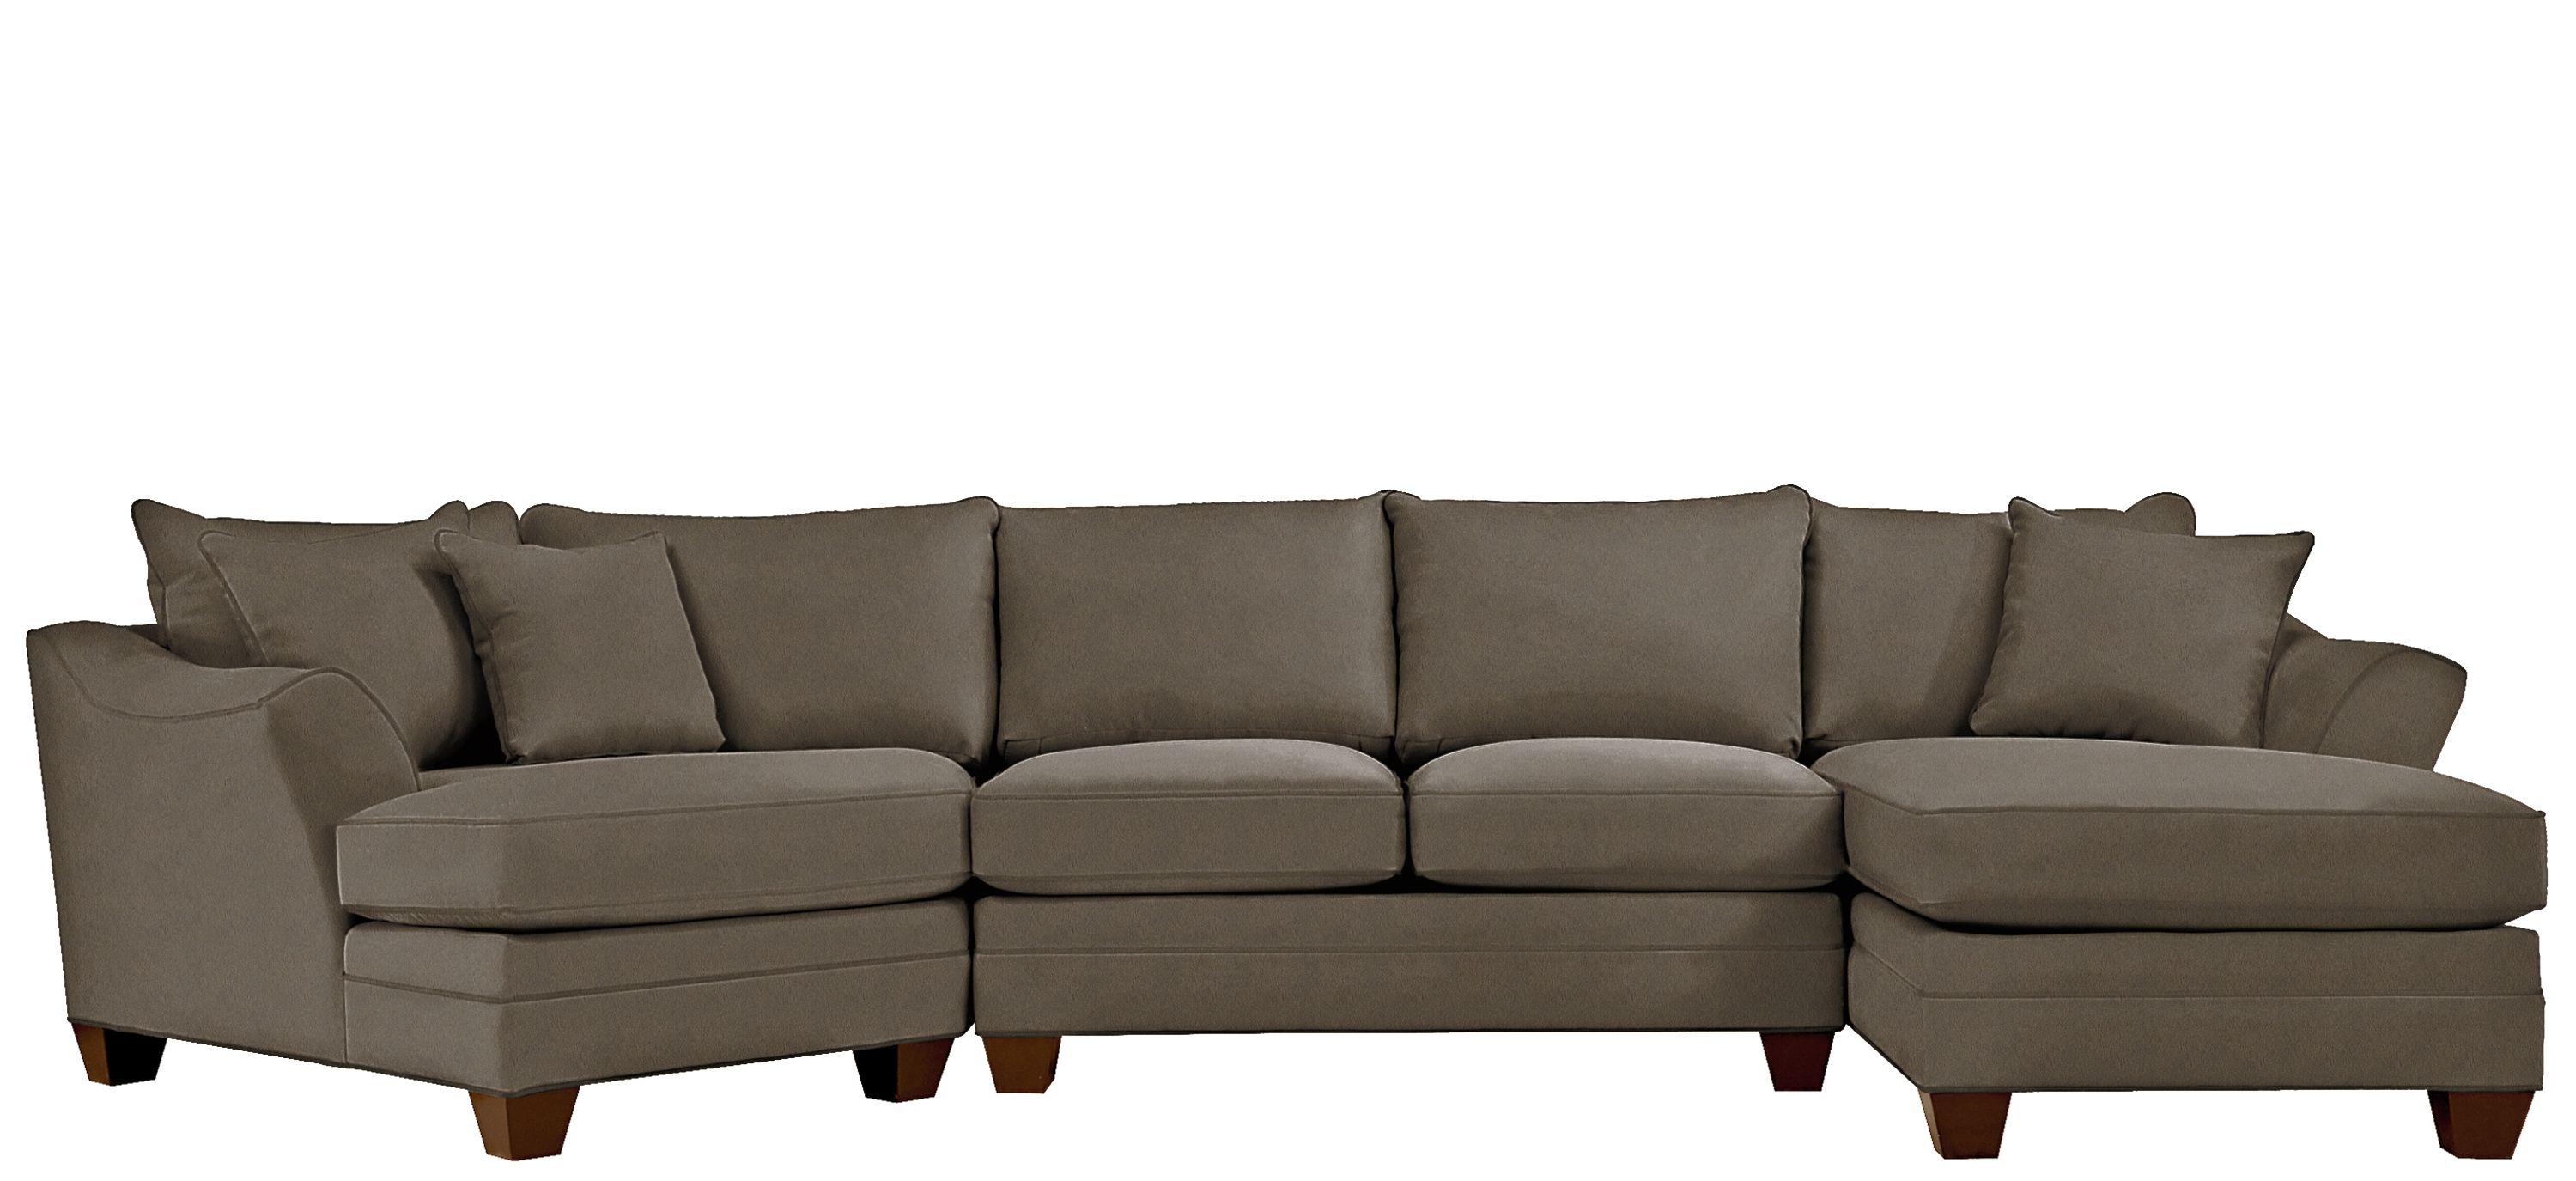 Foresthill 3-pc. Right Hand Facing Microfiber Sectional Sofa